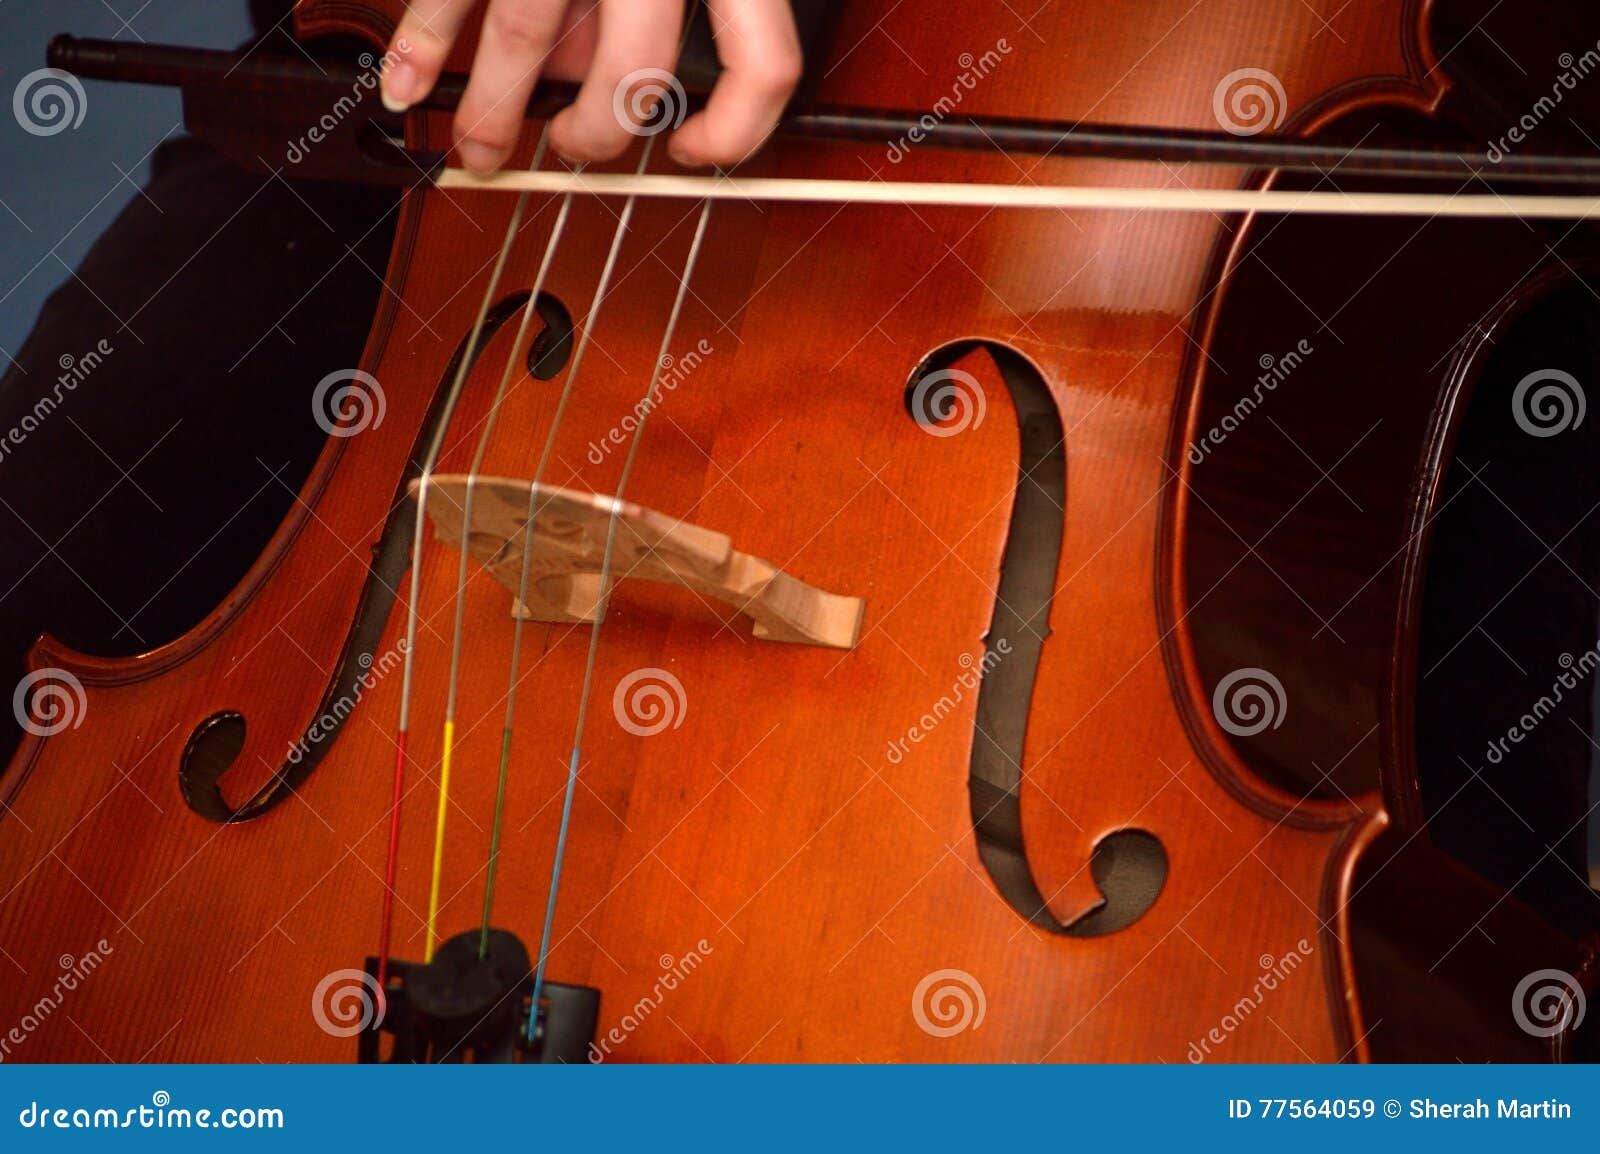 cellist playing cello